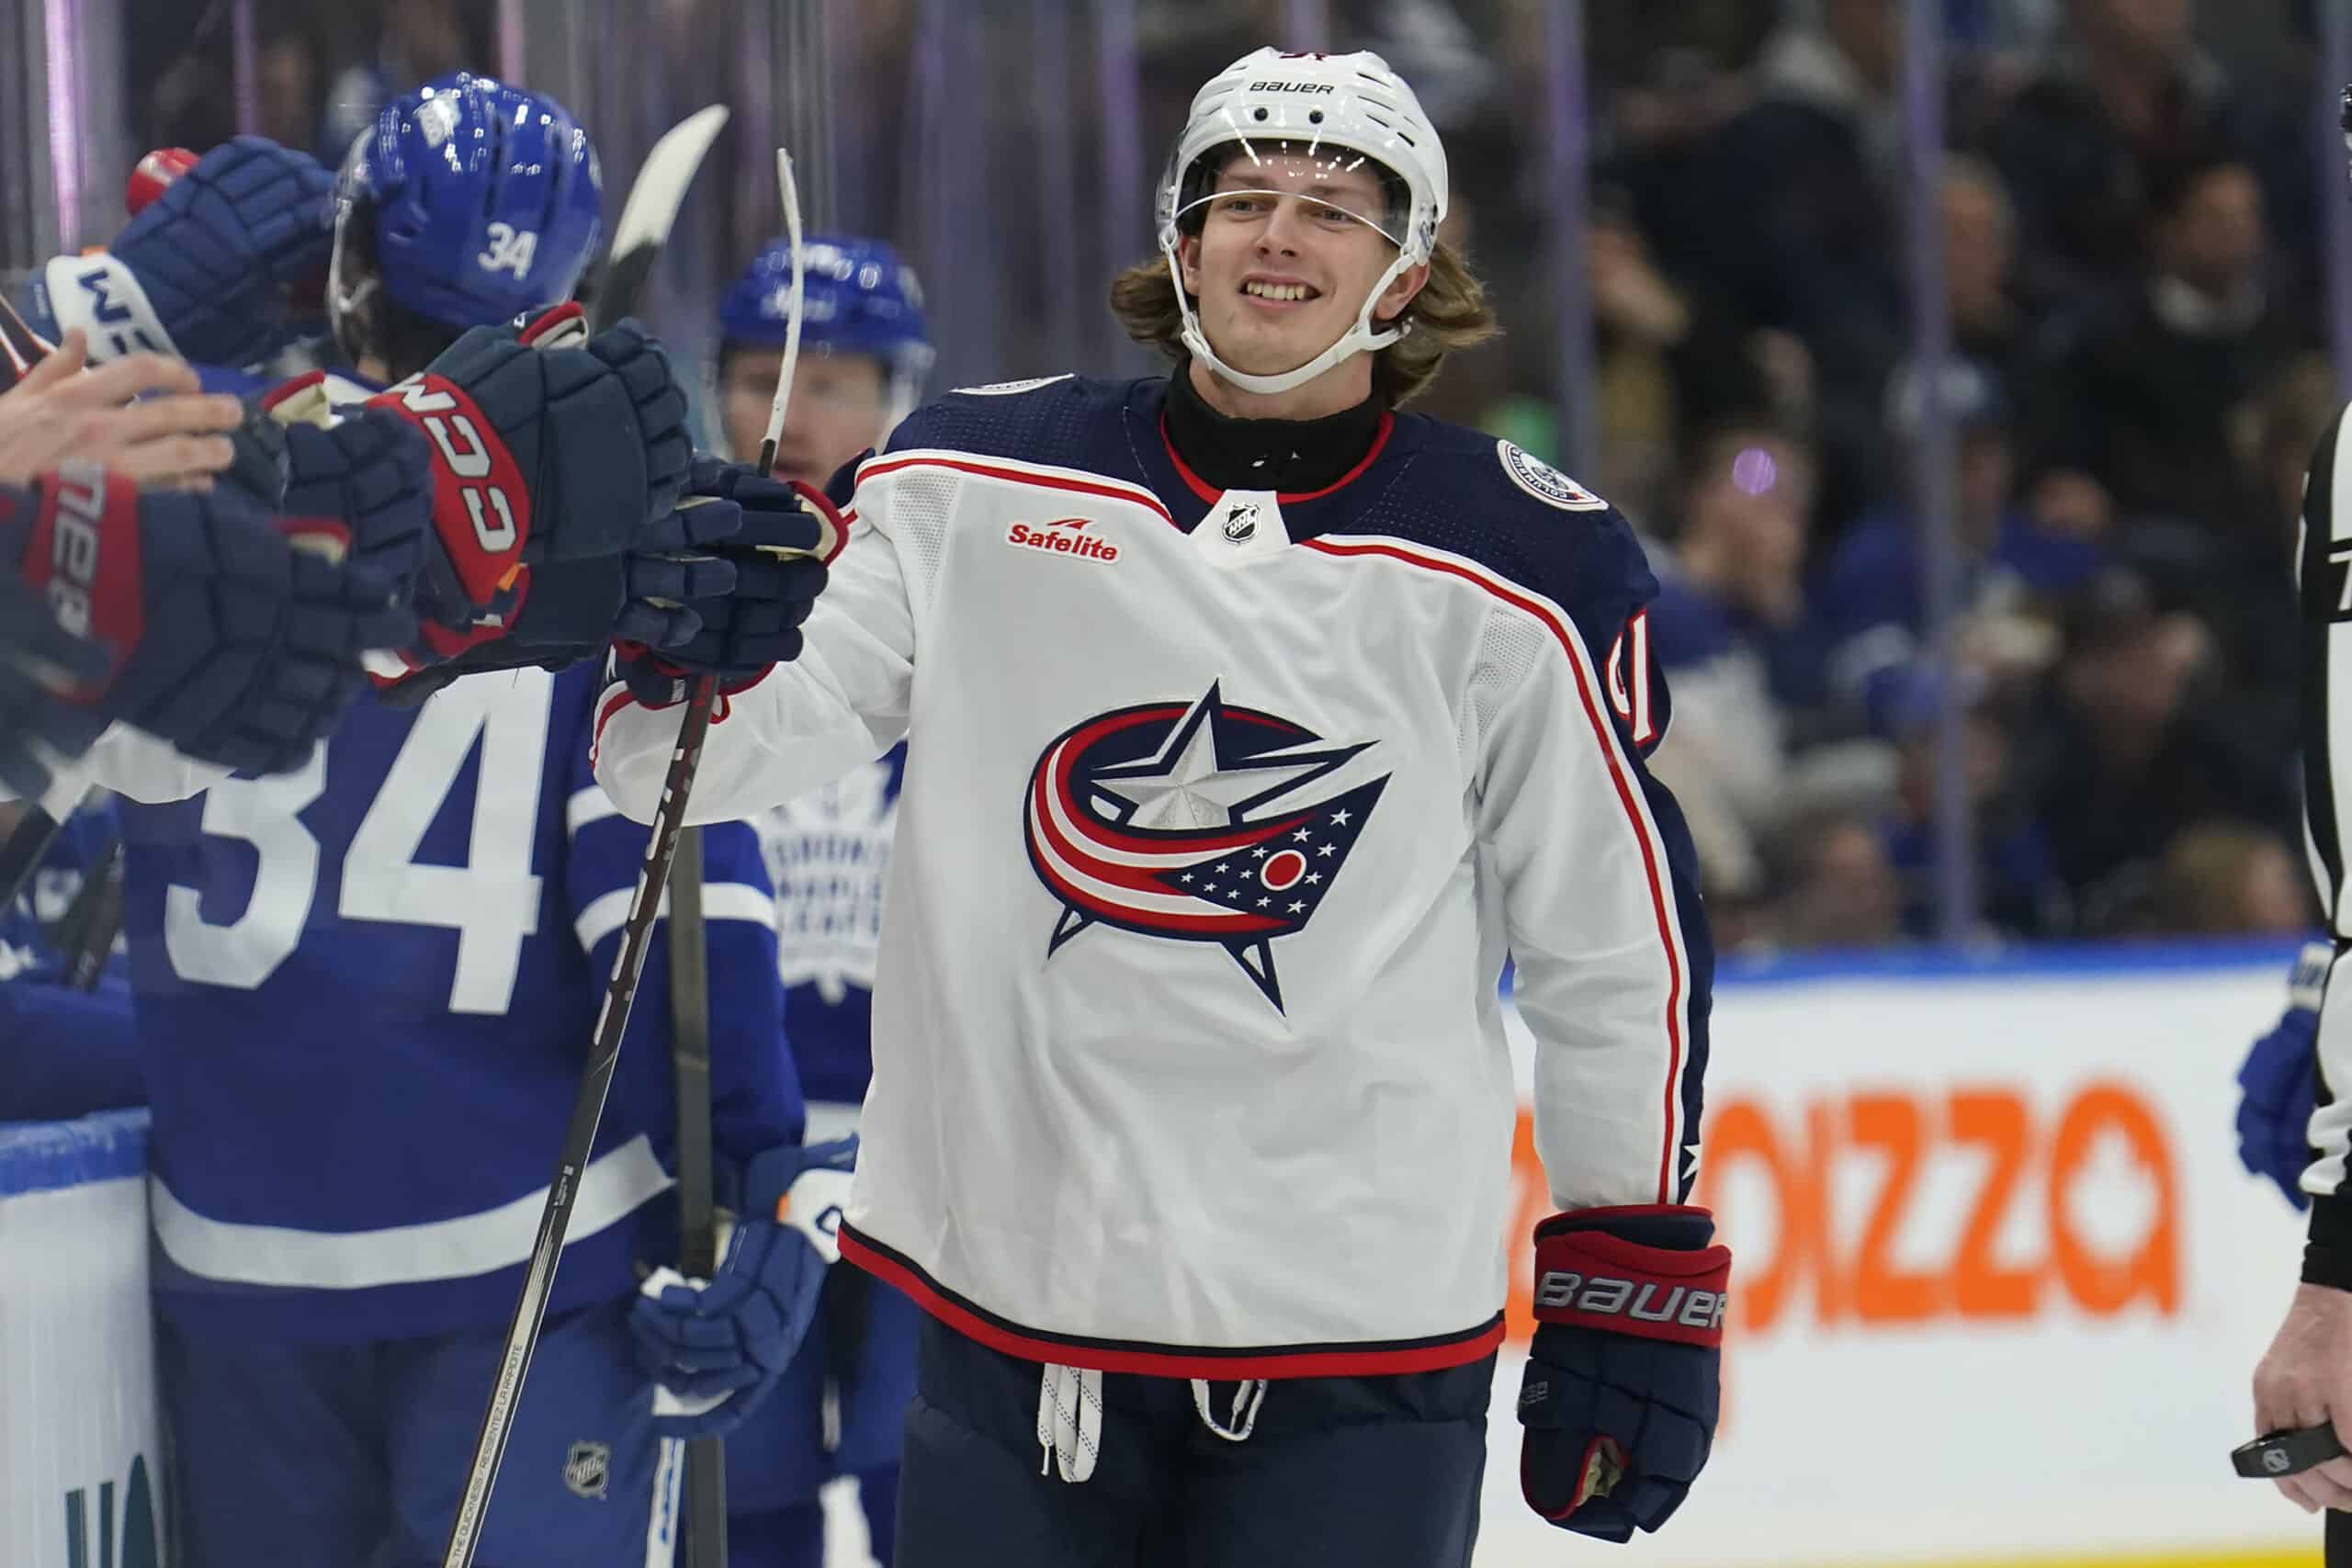 Columbus Blue Jackets forward Kent Johnson (91) gets congratulated after scoring against the Toronto Maple Leafs during the first period at Scotiabank Arena.